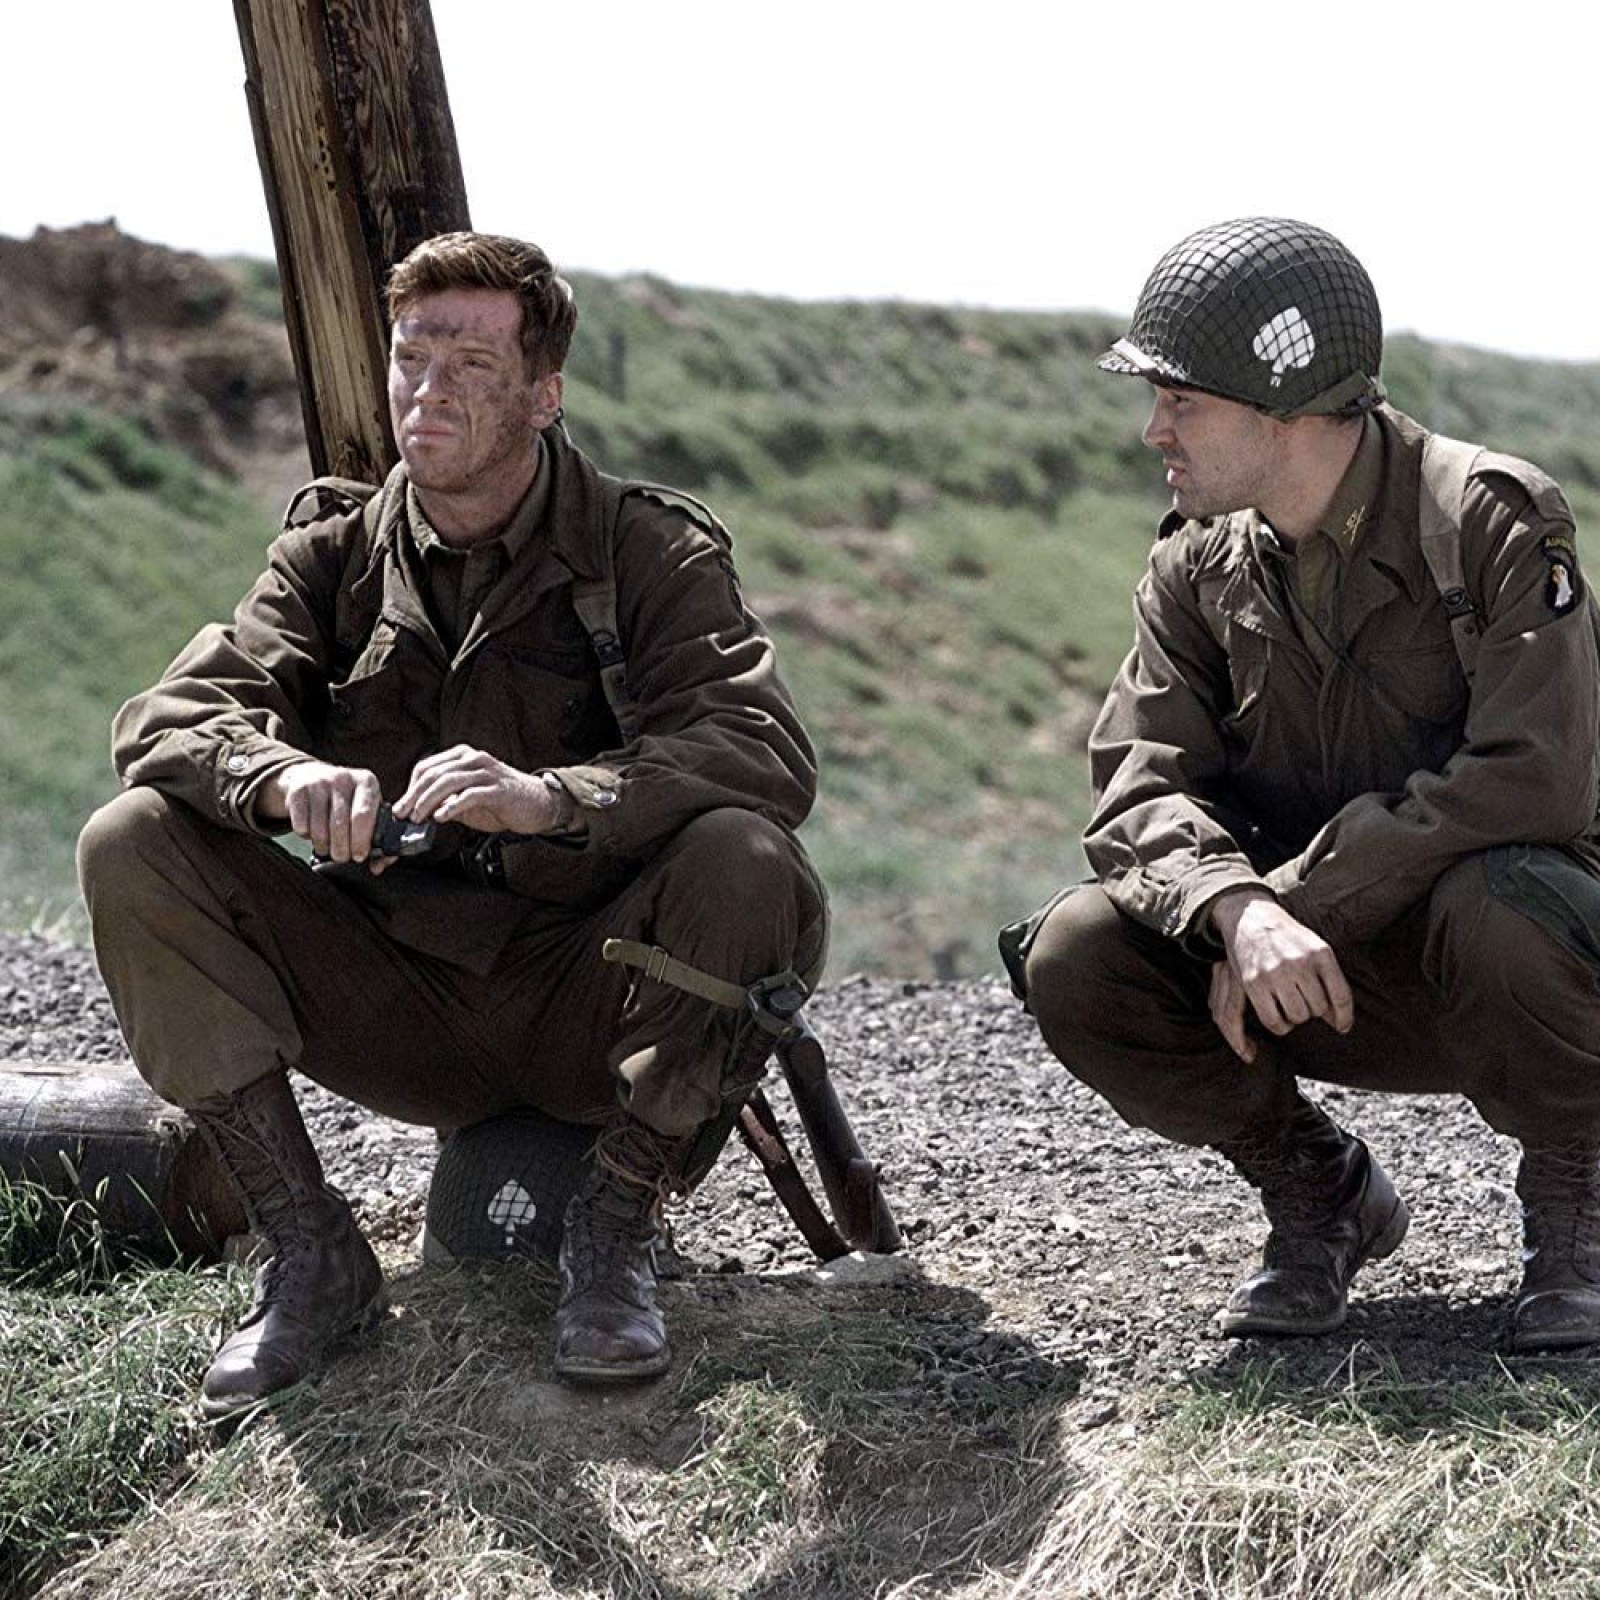 richard winters band of brothers